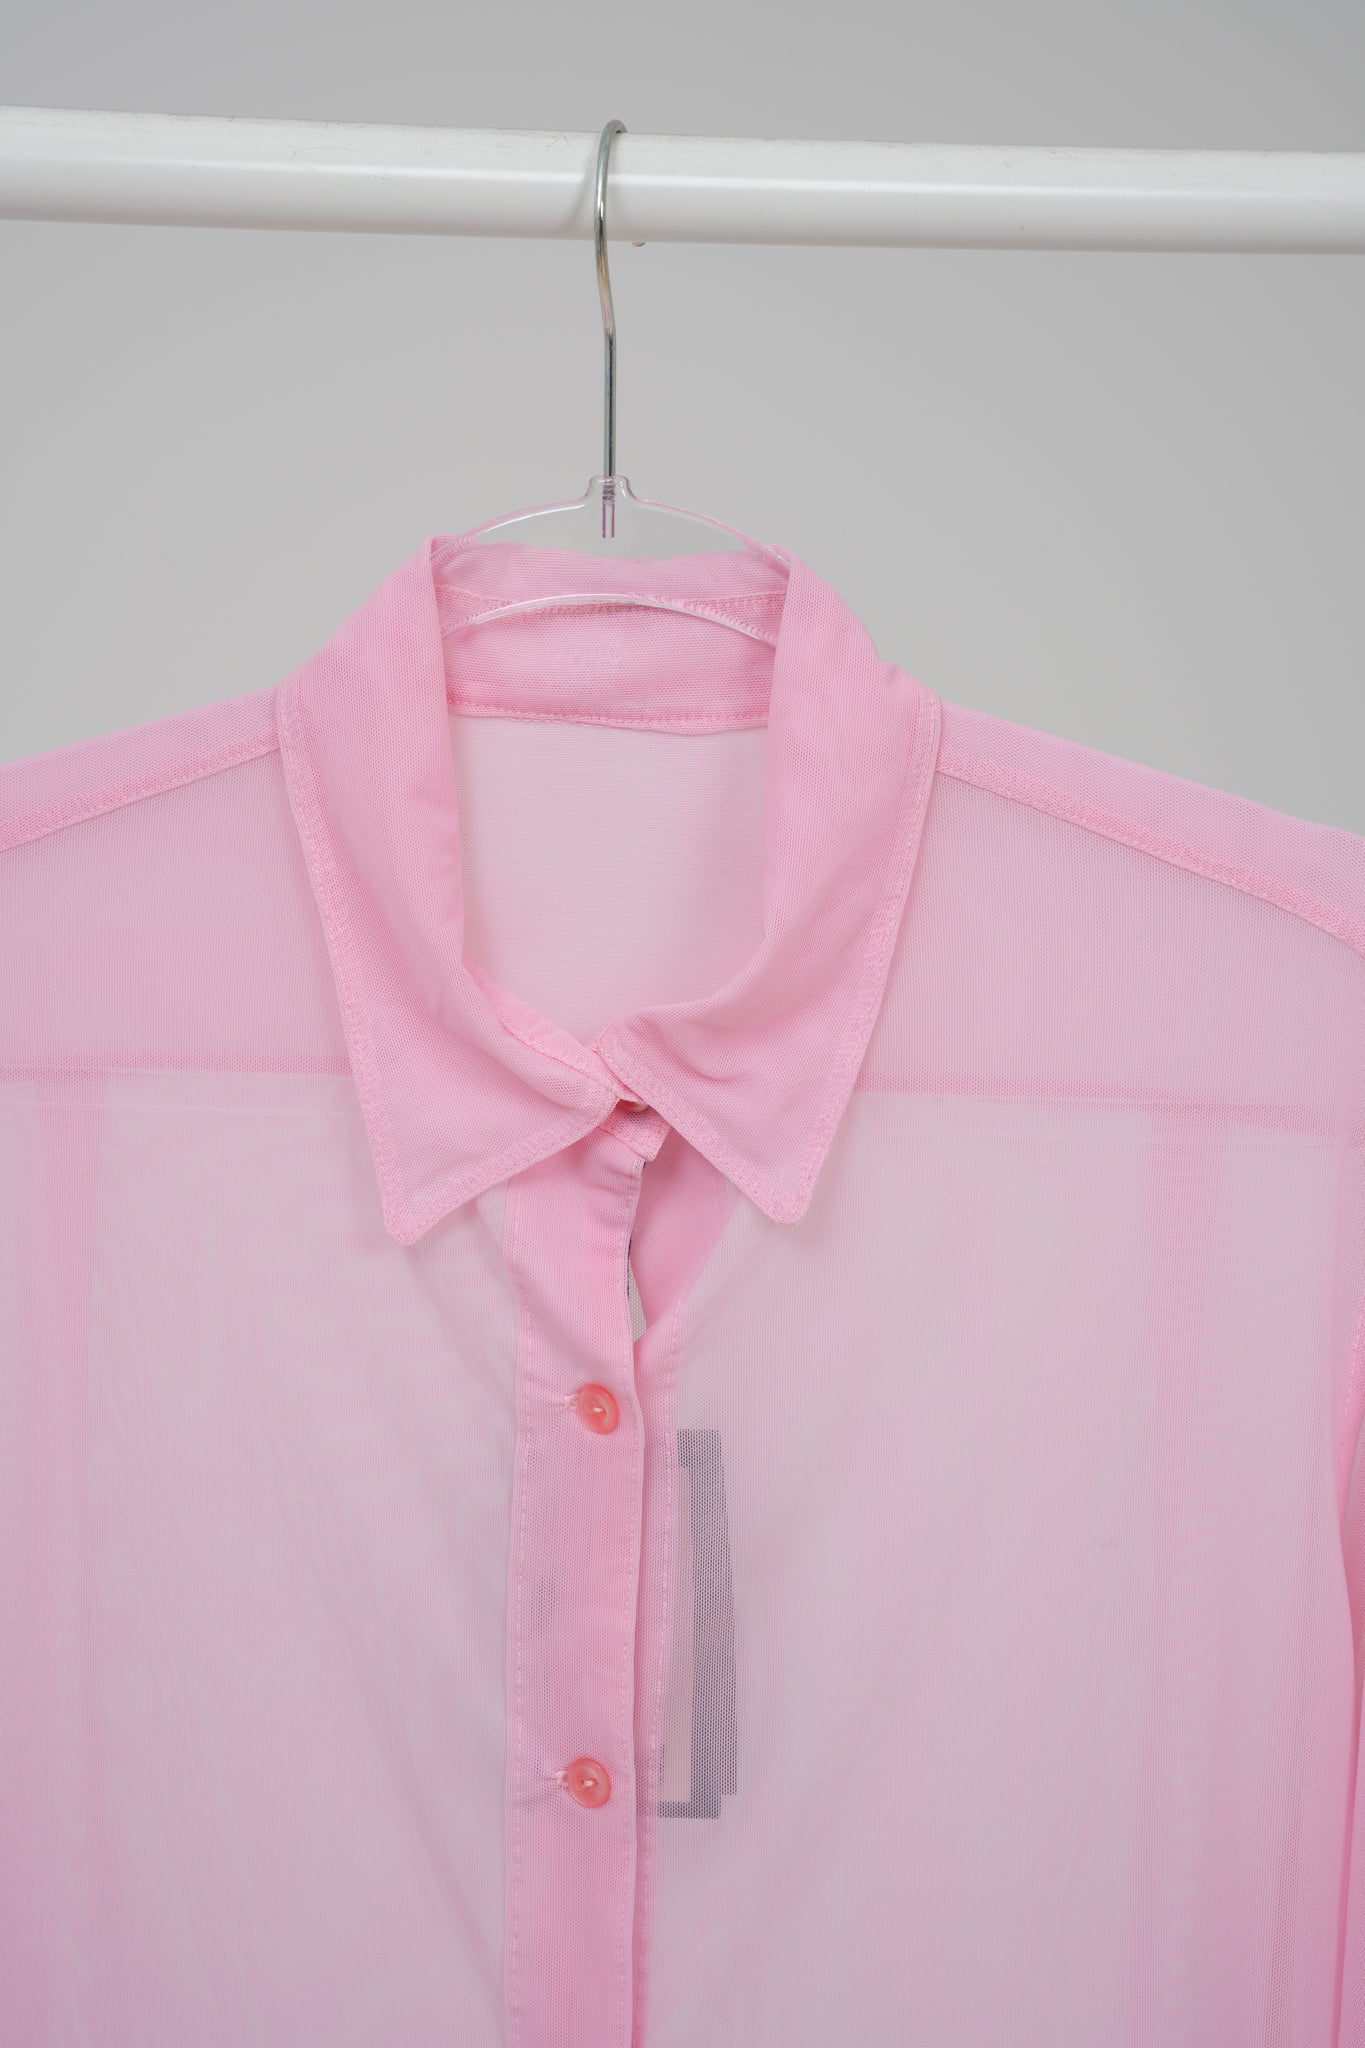 PINK Sheer designer Blouse With Long Sleeves, size M